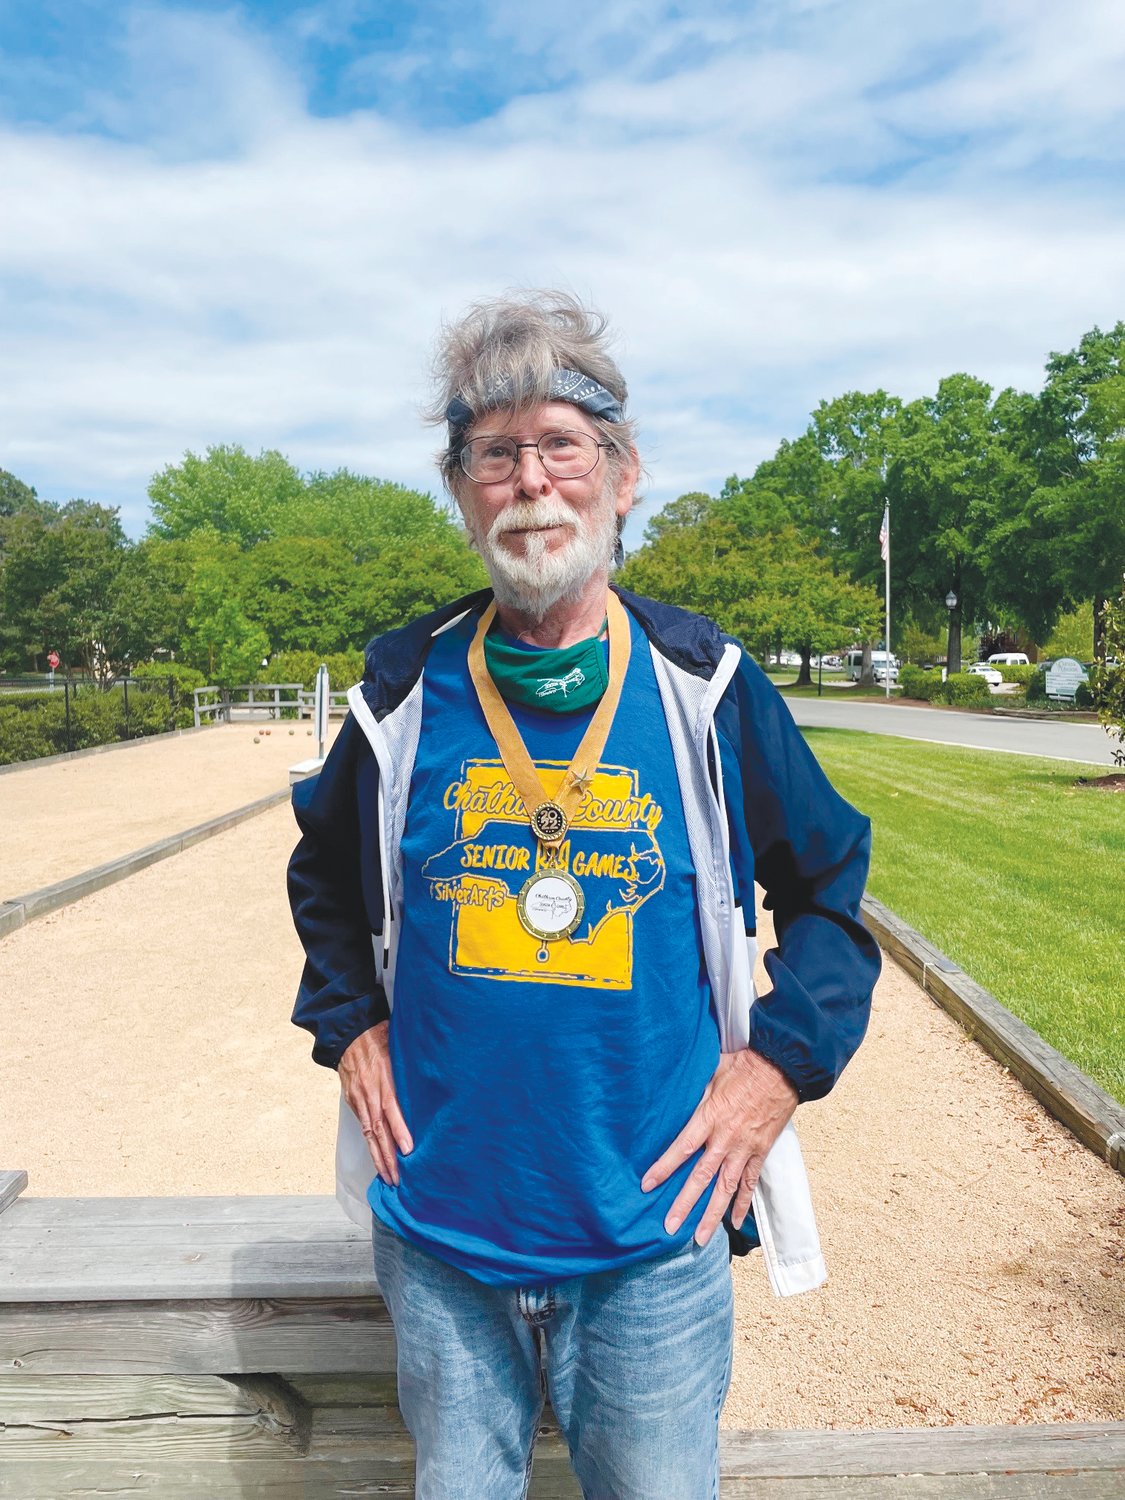 Among Bill Widman’s patronage of Council on Aging events includes Chatham County Senior Games, where he claimed a gold medal in men’s bocce.